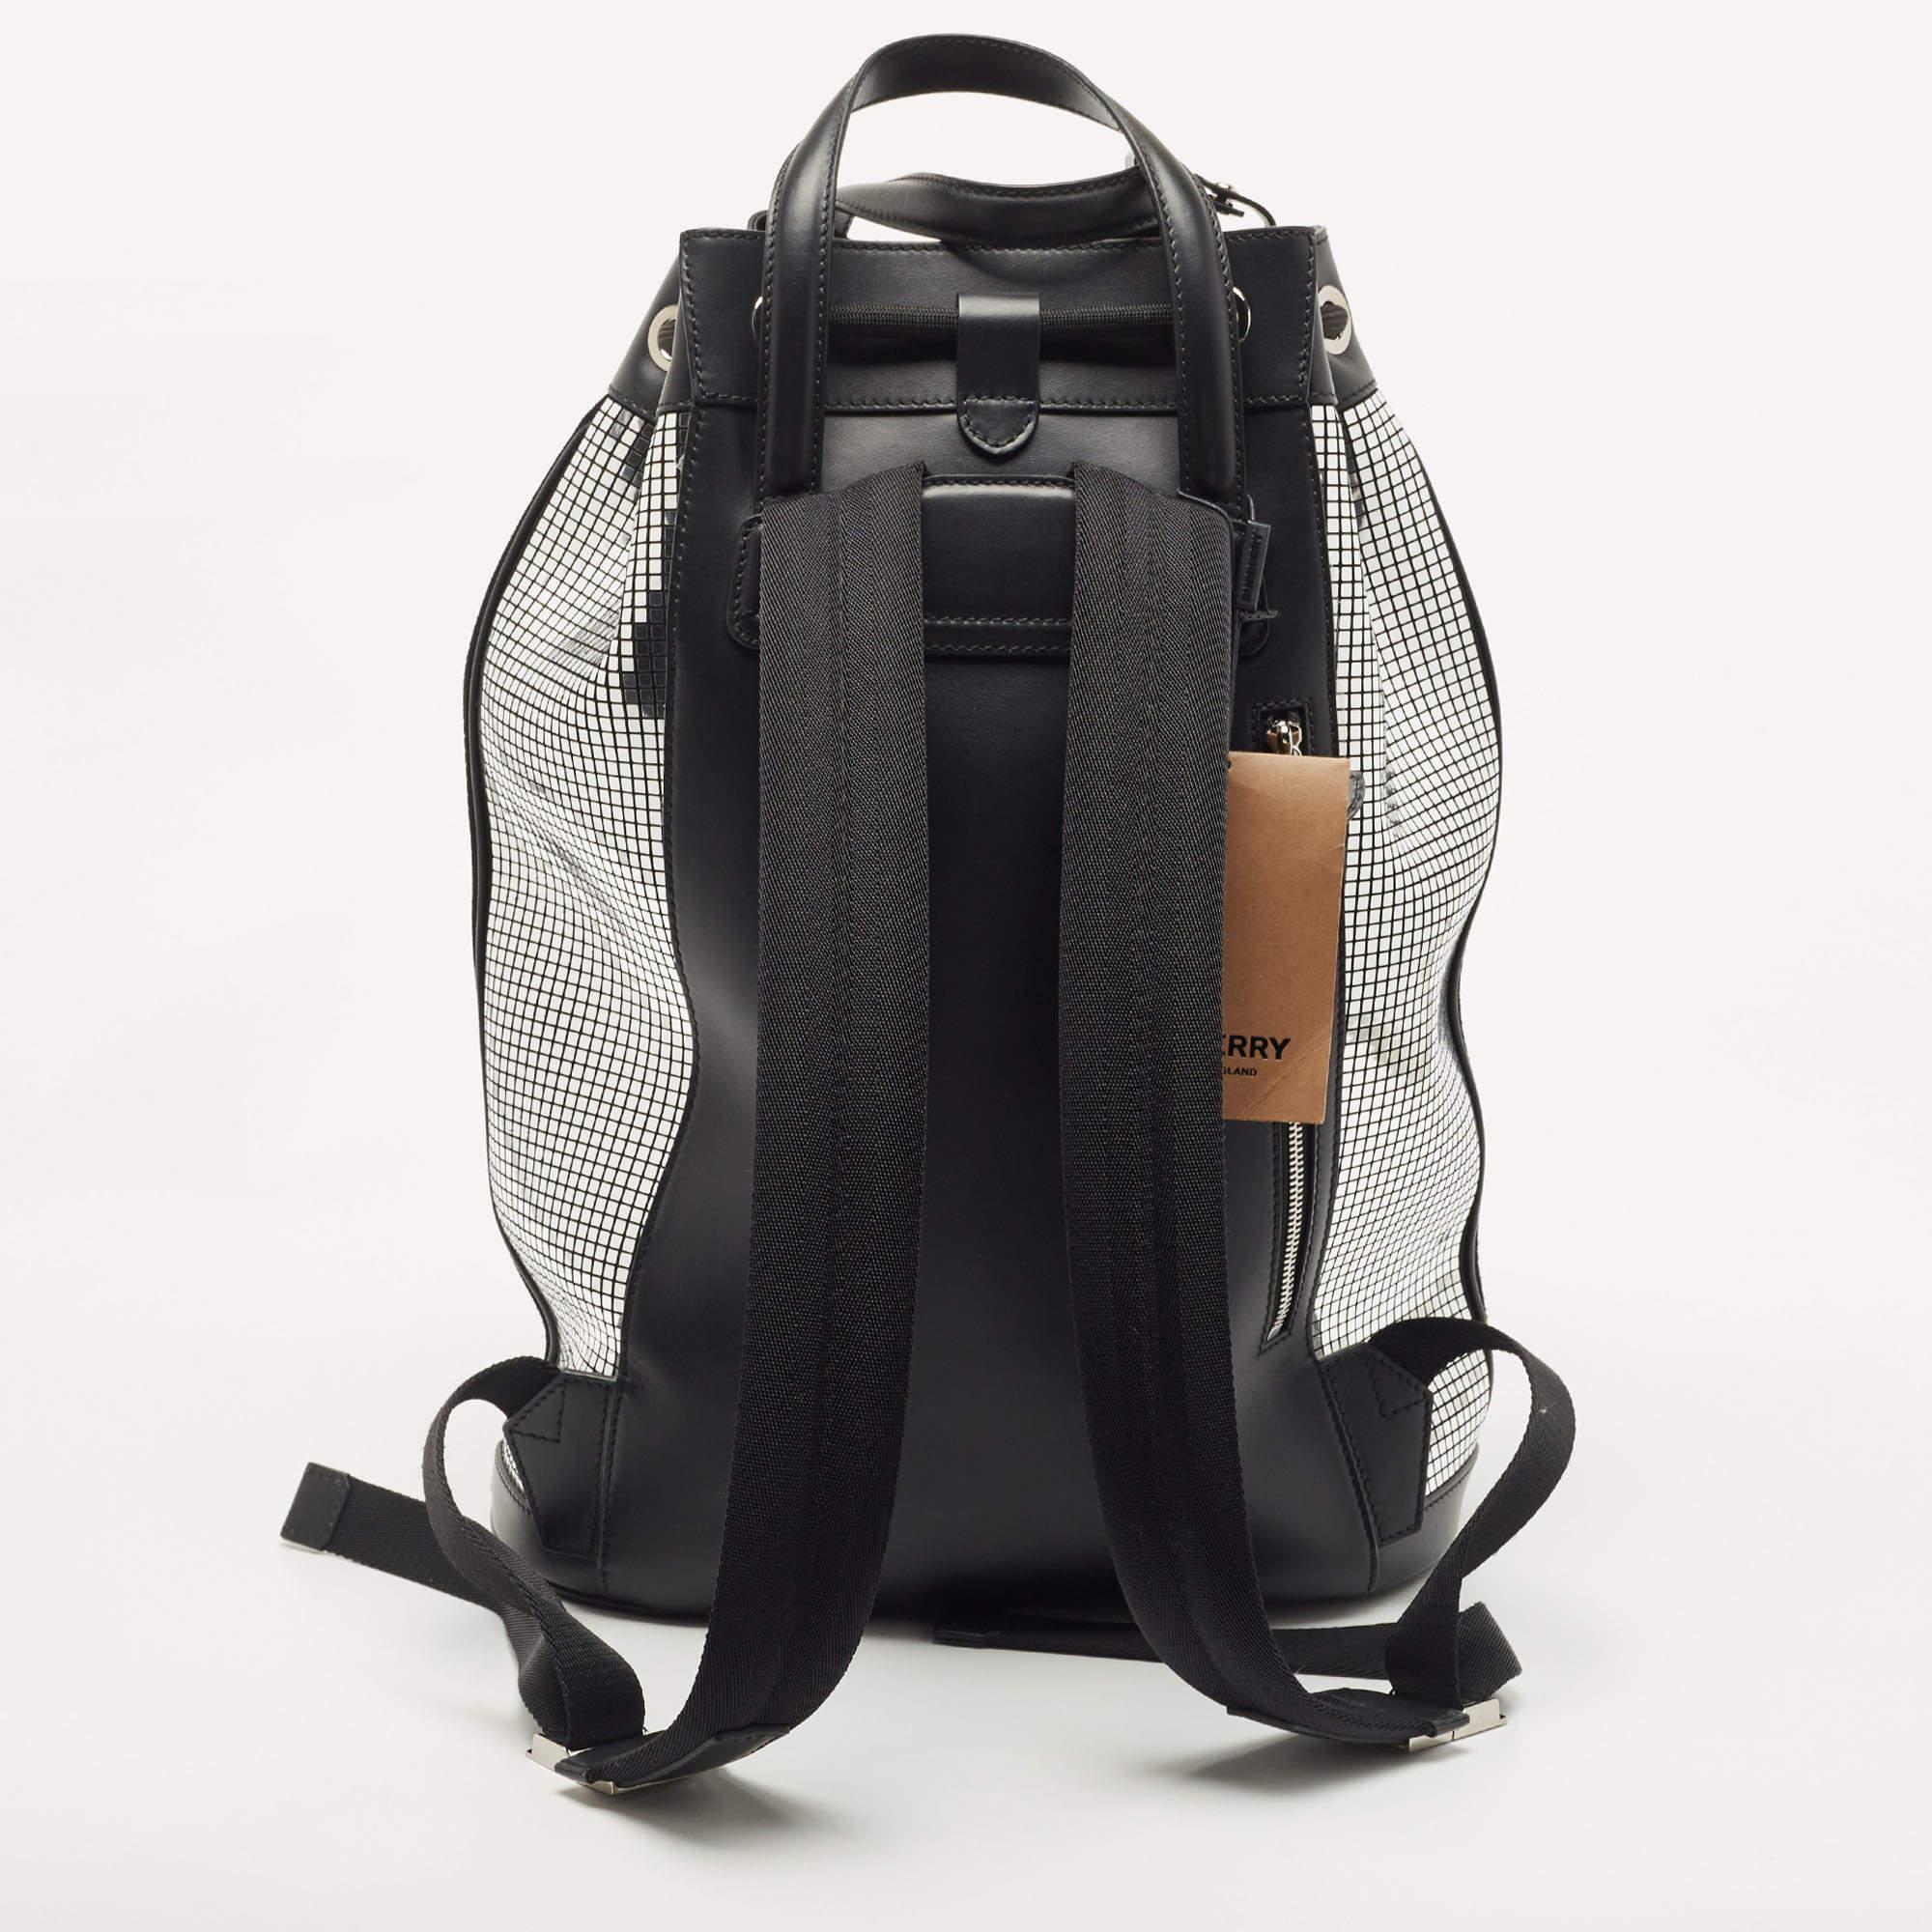 This practical and fashionable backpack will come in handy for daily use or as a style statement. It is smartly designed with a spacious interior for your belongings. Two shoulder straps make it ready to be yours.

Includes: Original Dustbag, Tag,